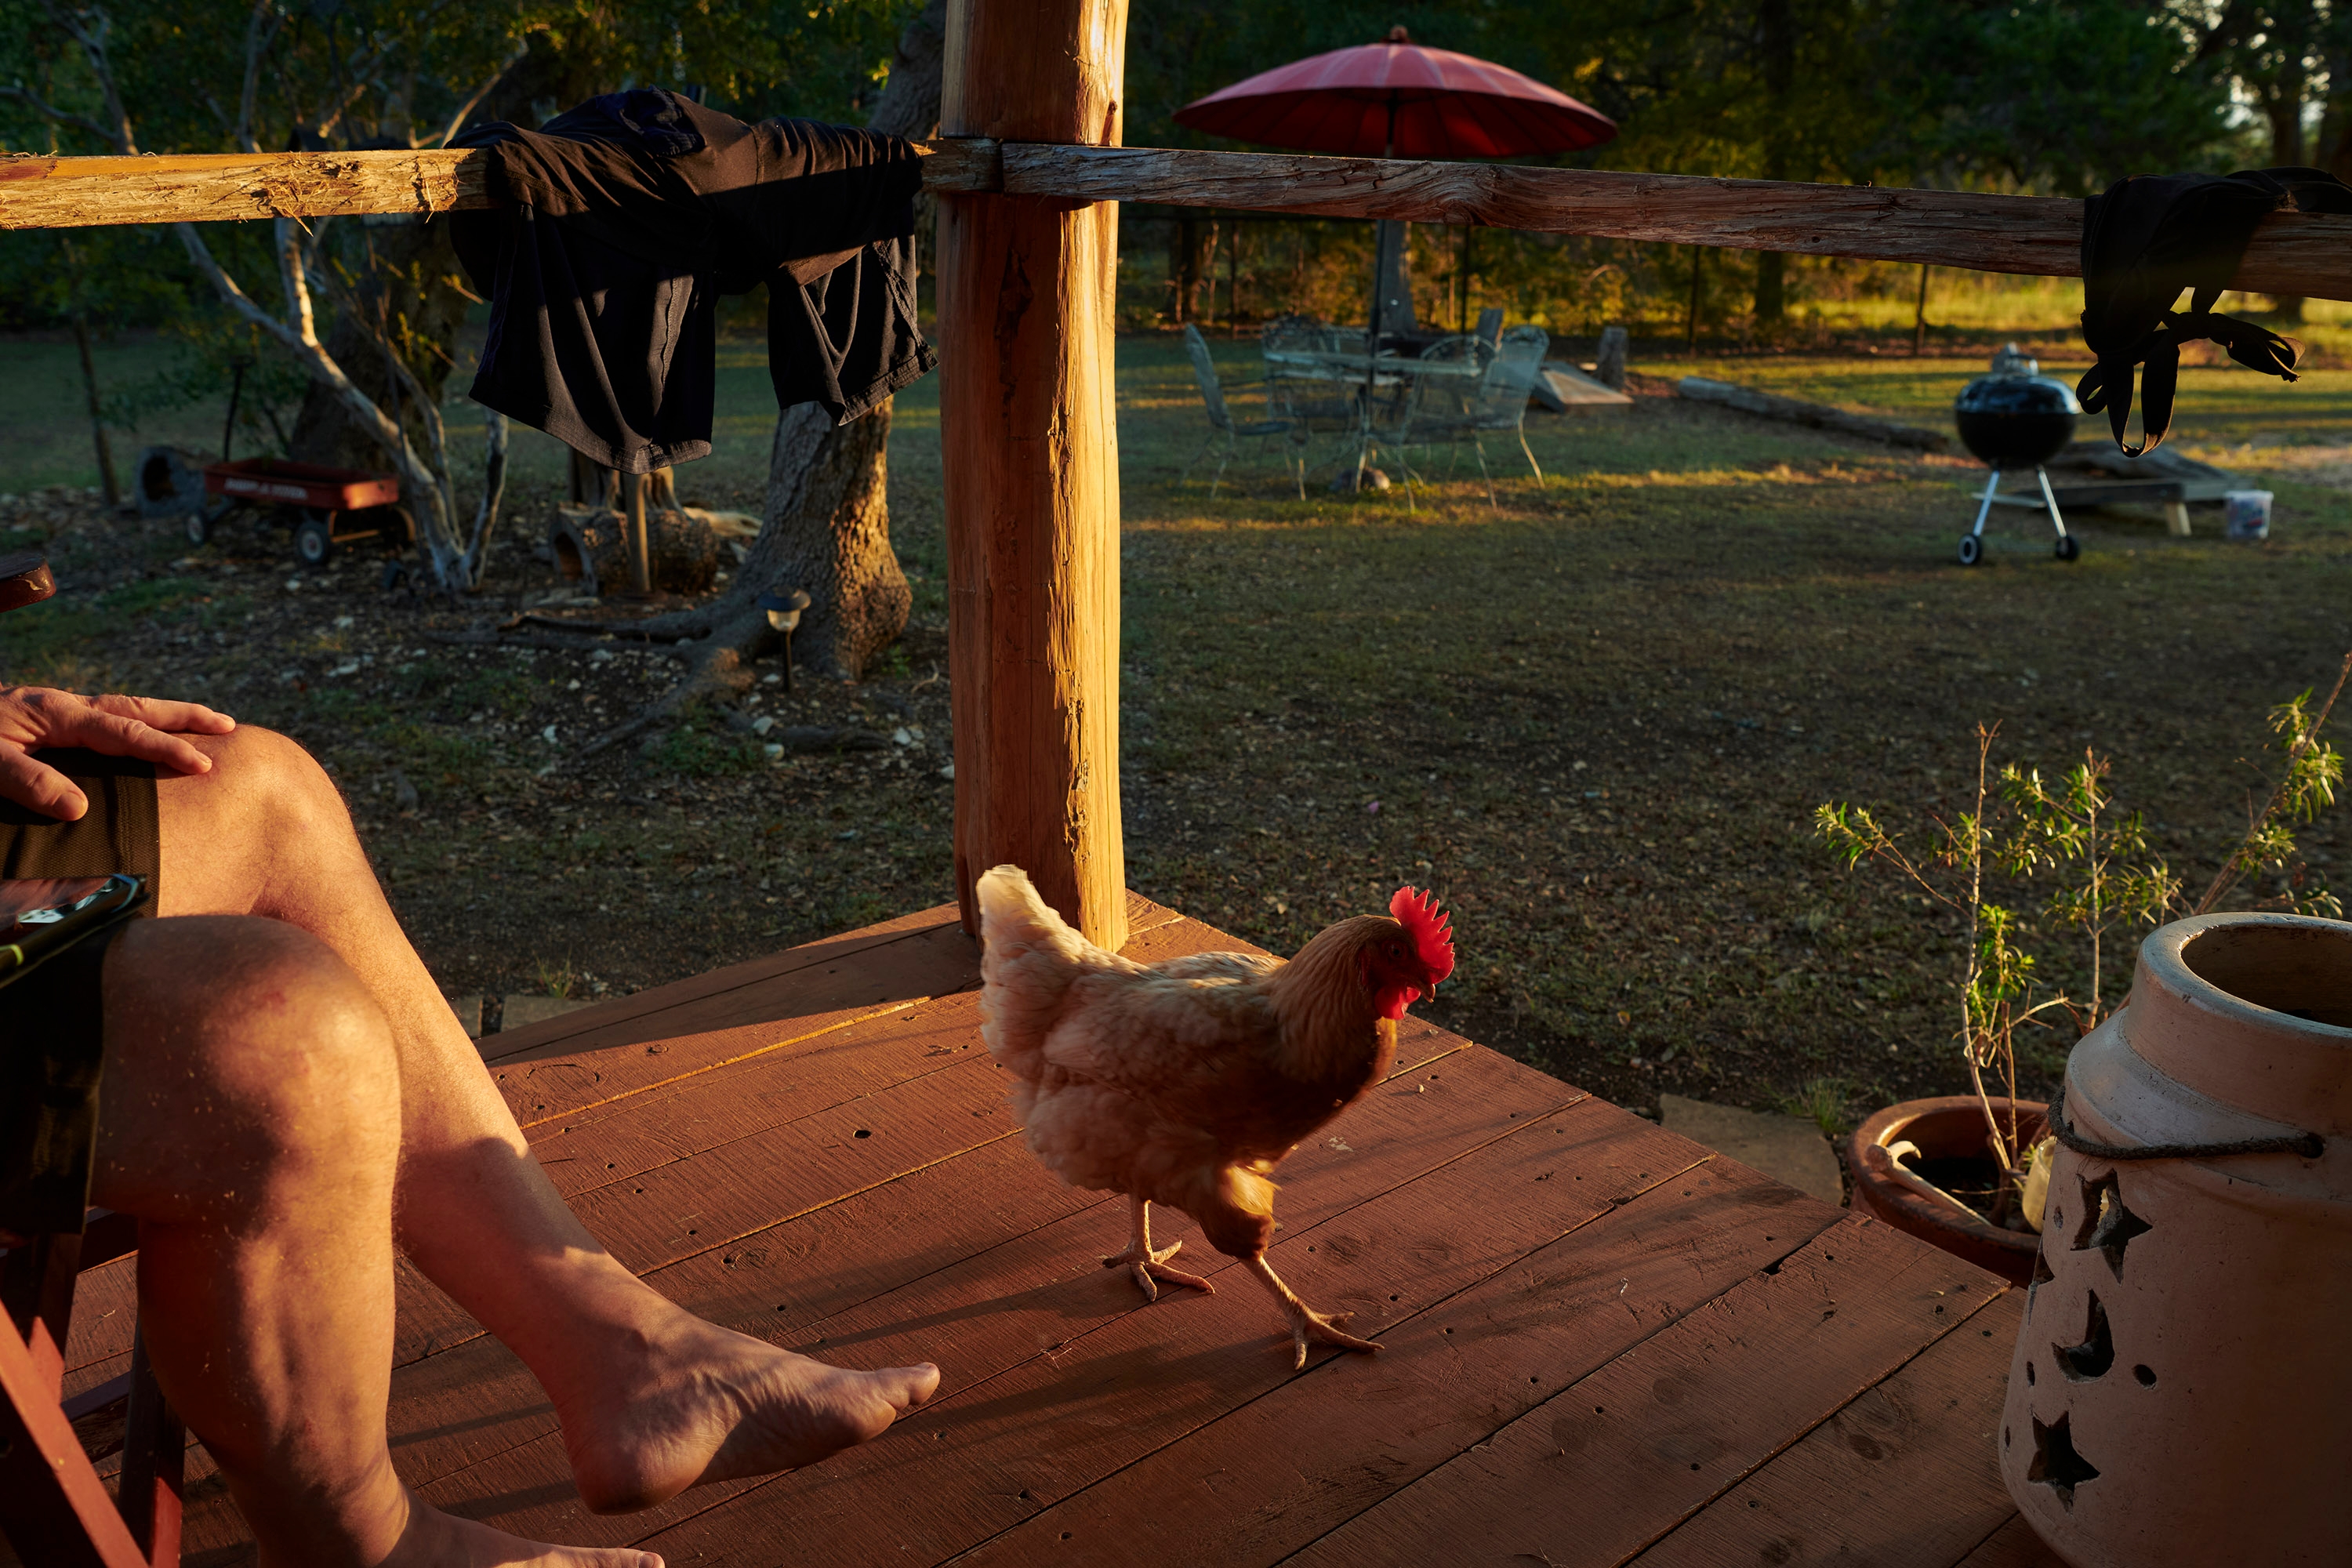 A chicken roams the porch at sunrise in Boerne Texas.